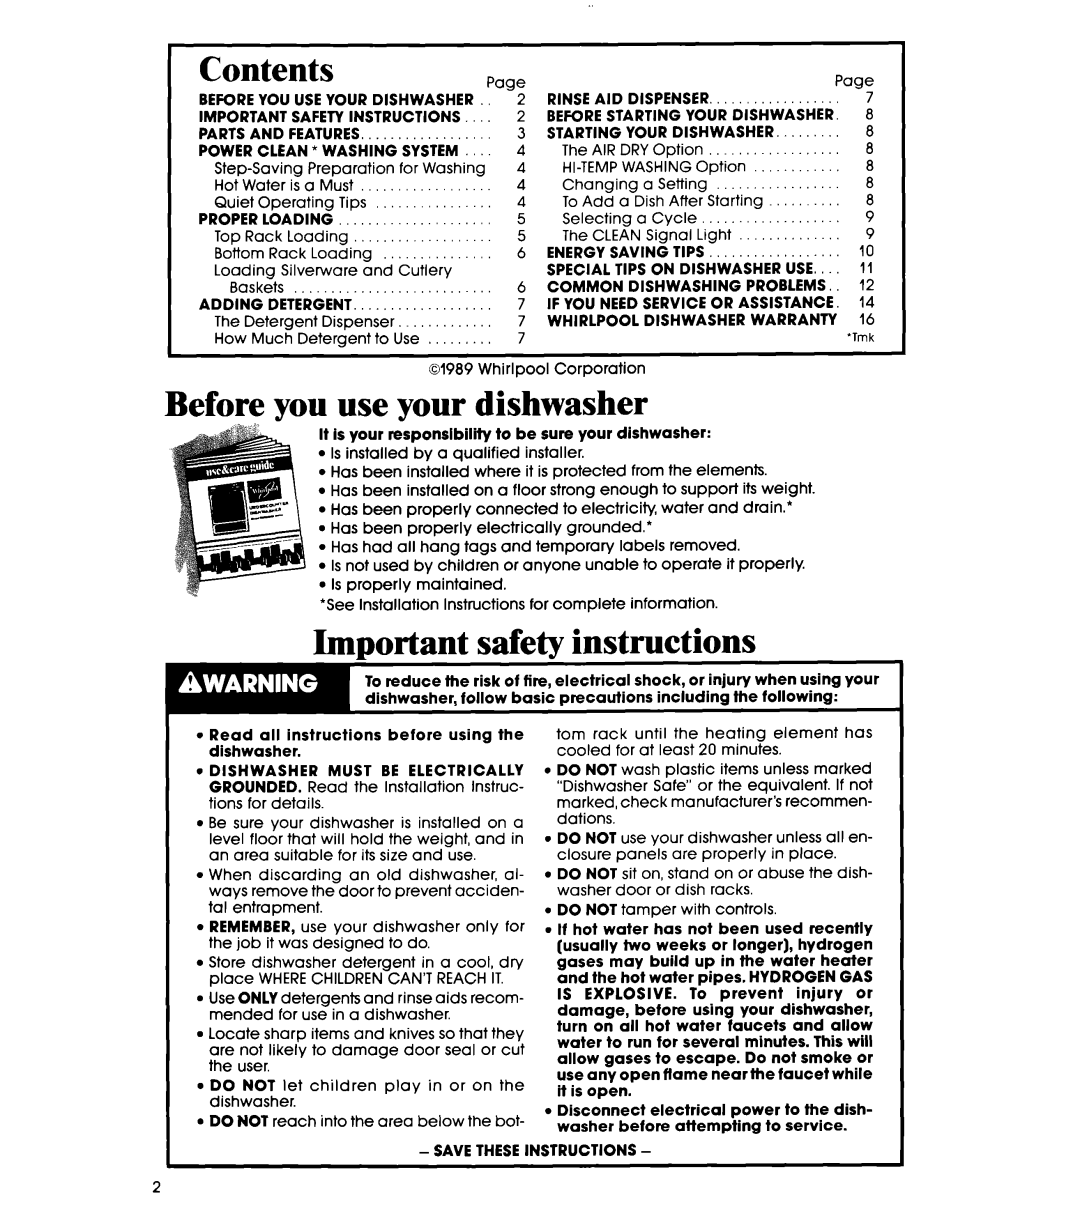 Whirlpool DU9000XR manual Contents, Before you use your dishwasher, Important safety instructions 